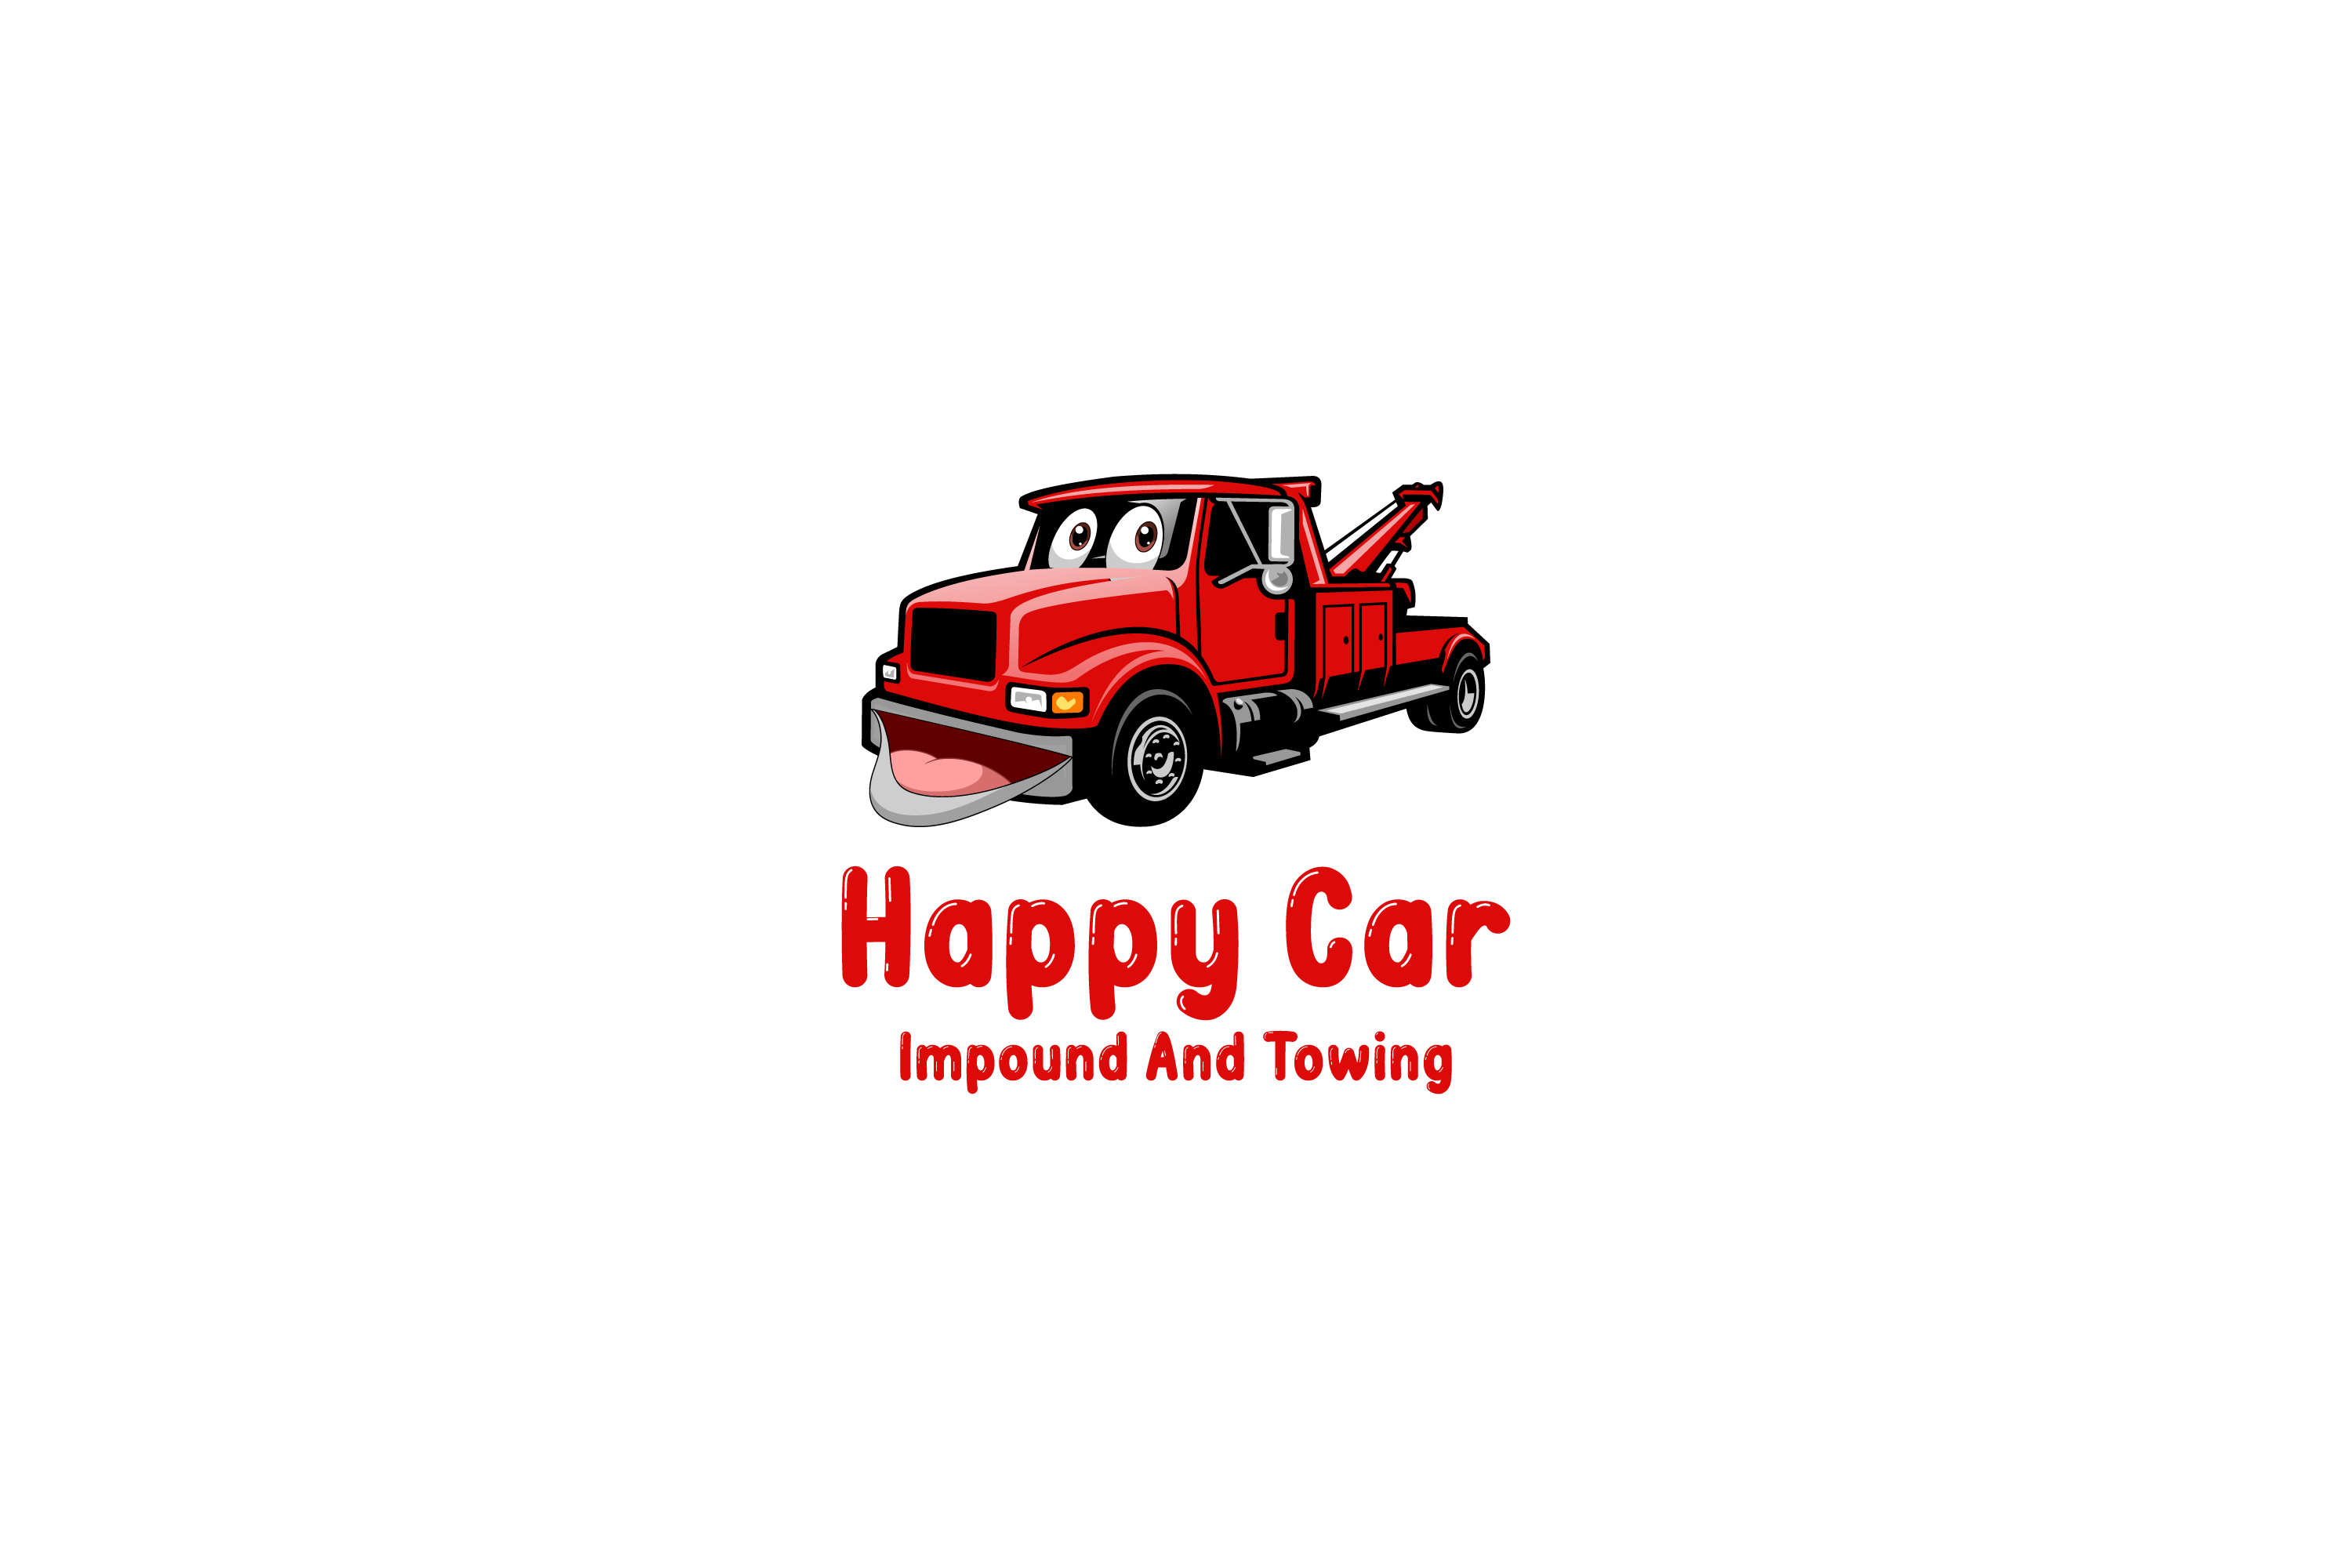 Happy Car Impound and Towing logo